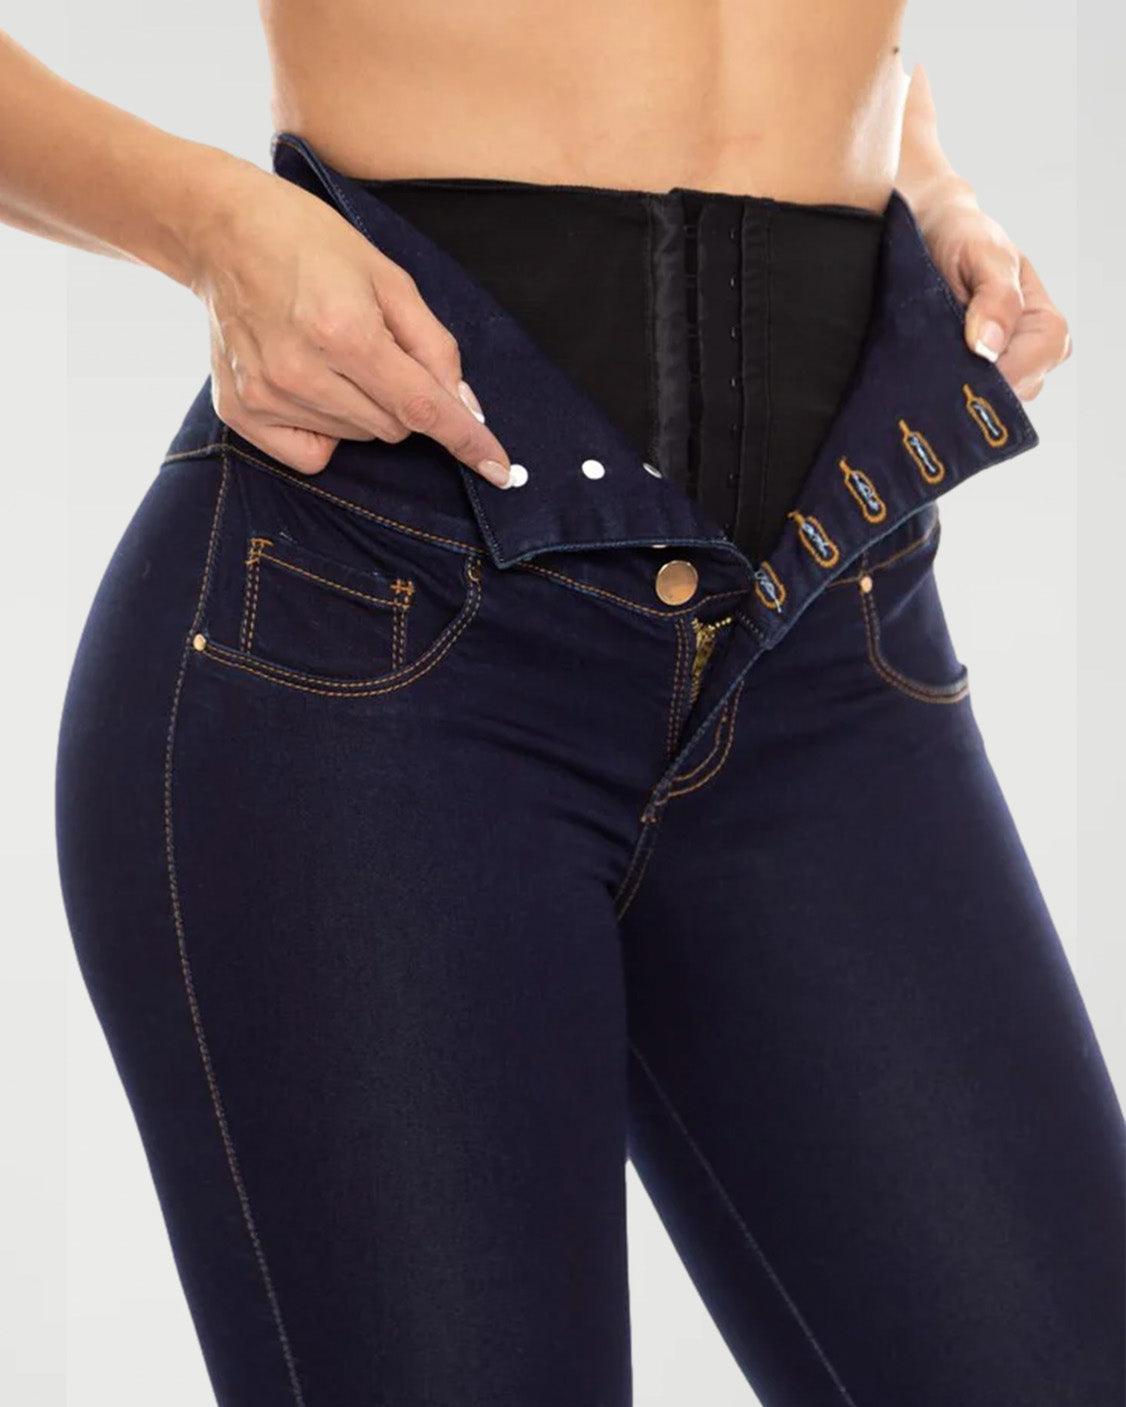 Wishe Colombian Butt Lift Jeans High Waist With Internal Girdle